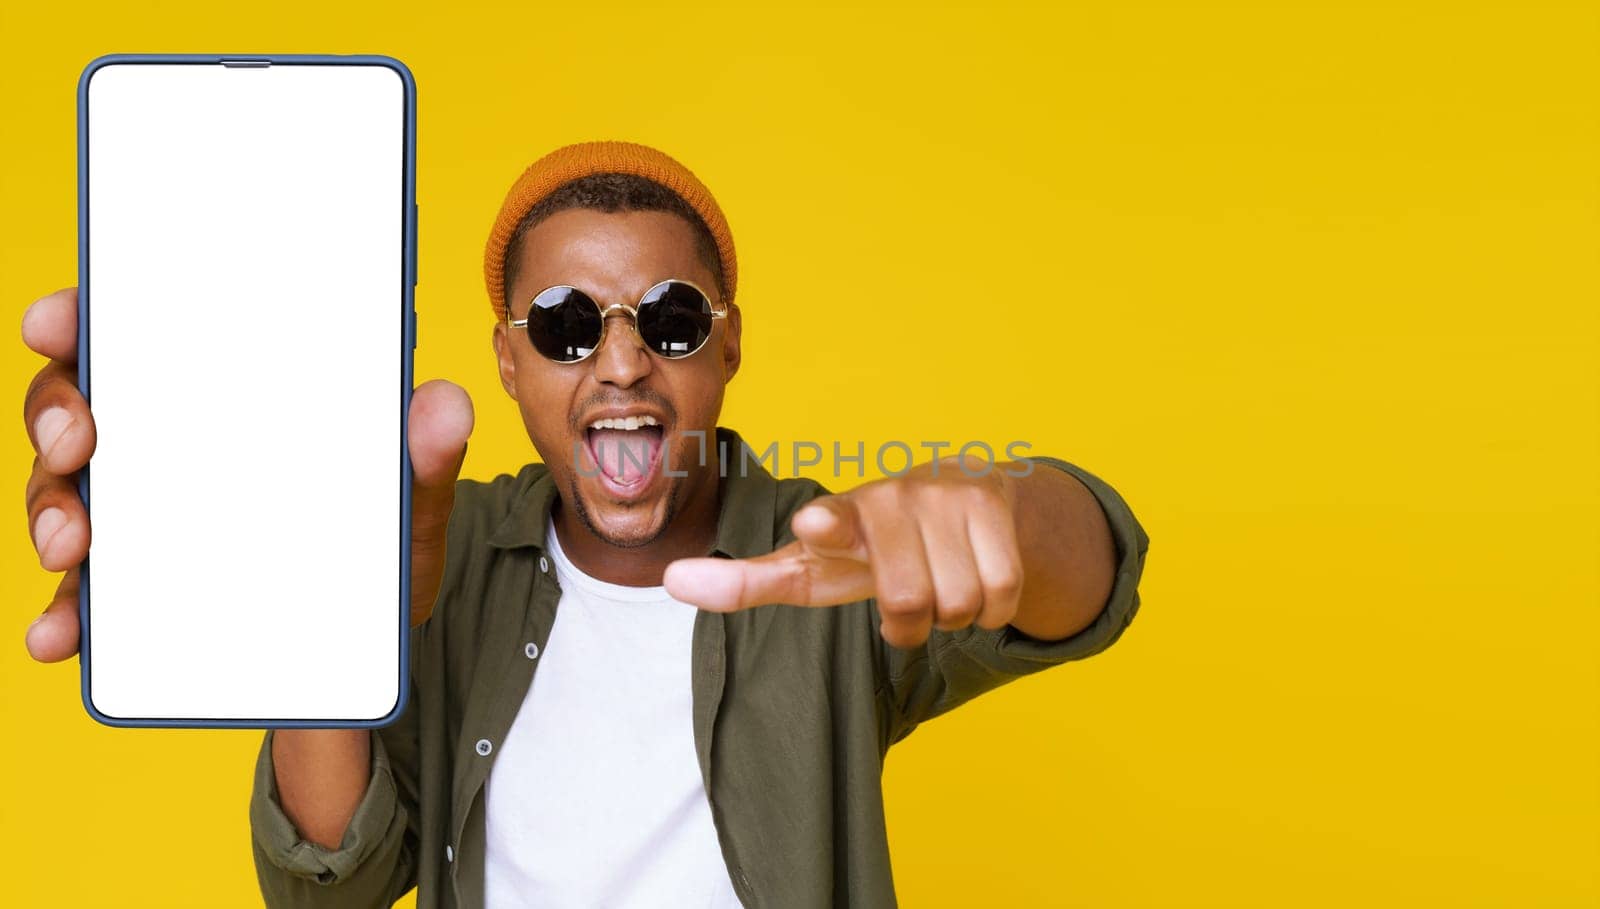 Young man is seen pointing towards camera while showcasing his smartphone with white blank screen on yellow background. Concept of communication and technology, promoting use of mobile devices and social media for business and personal purposes. by LipikStockMedia